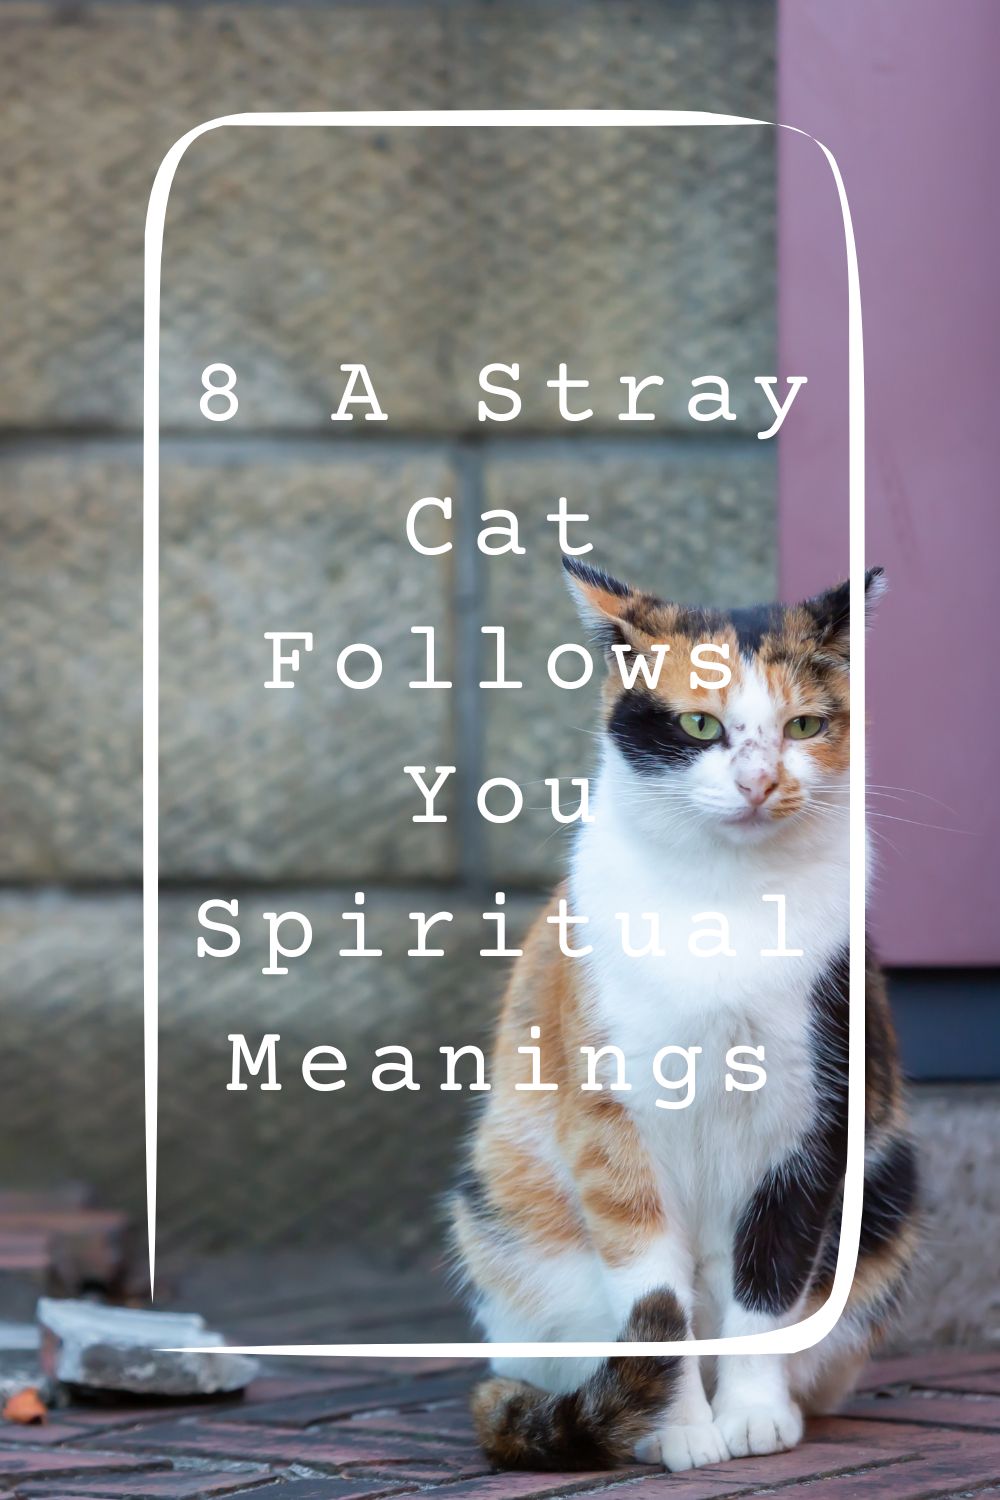 8 A Stray Cat Follows You Spiritual Meanings 1